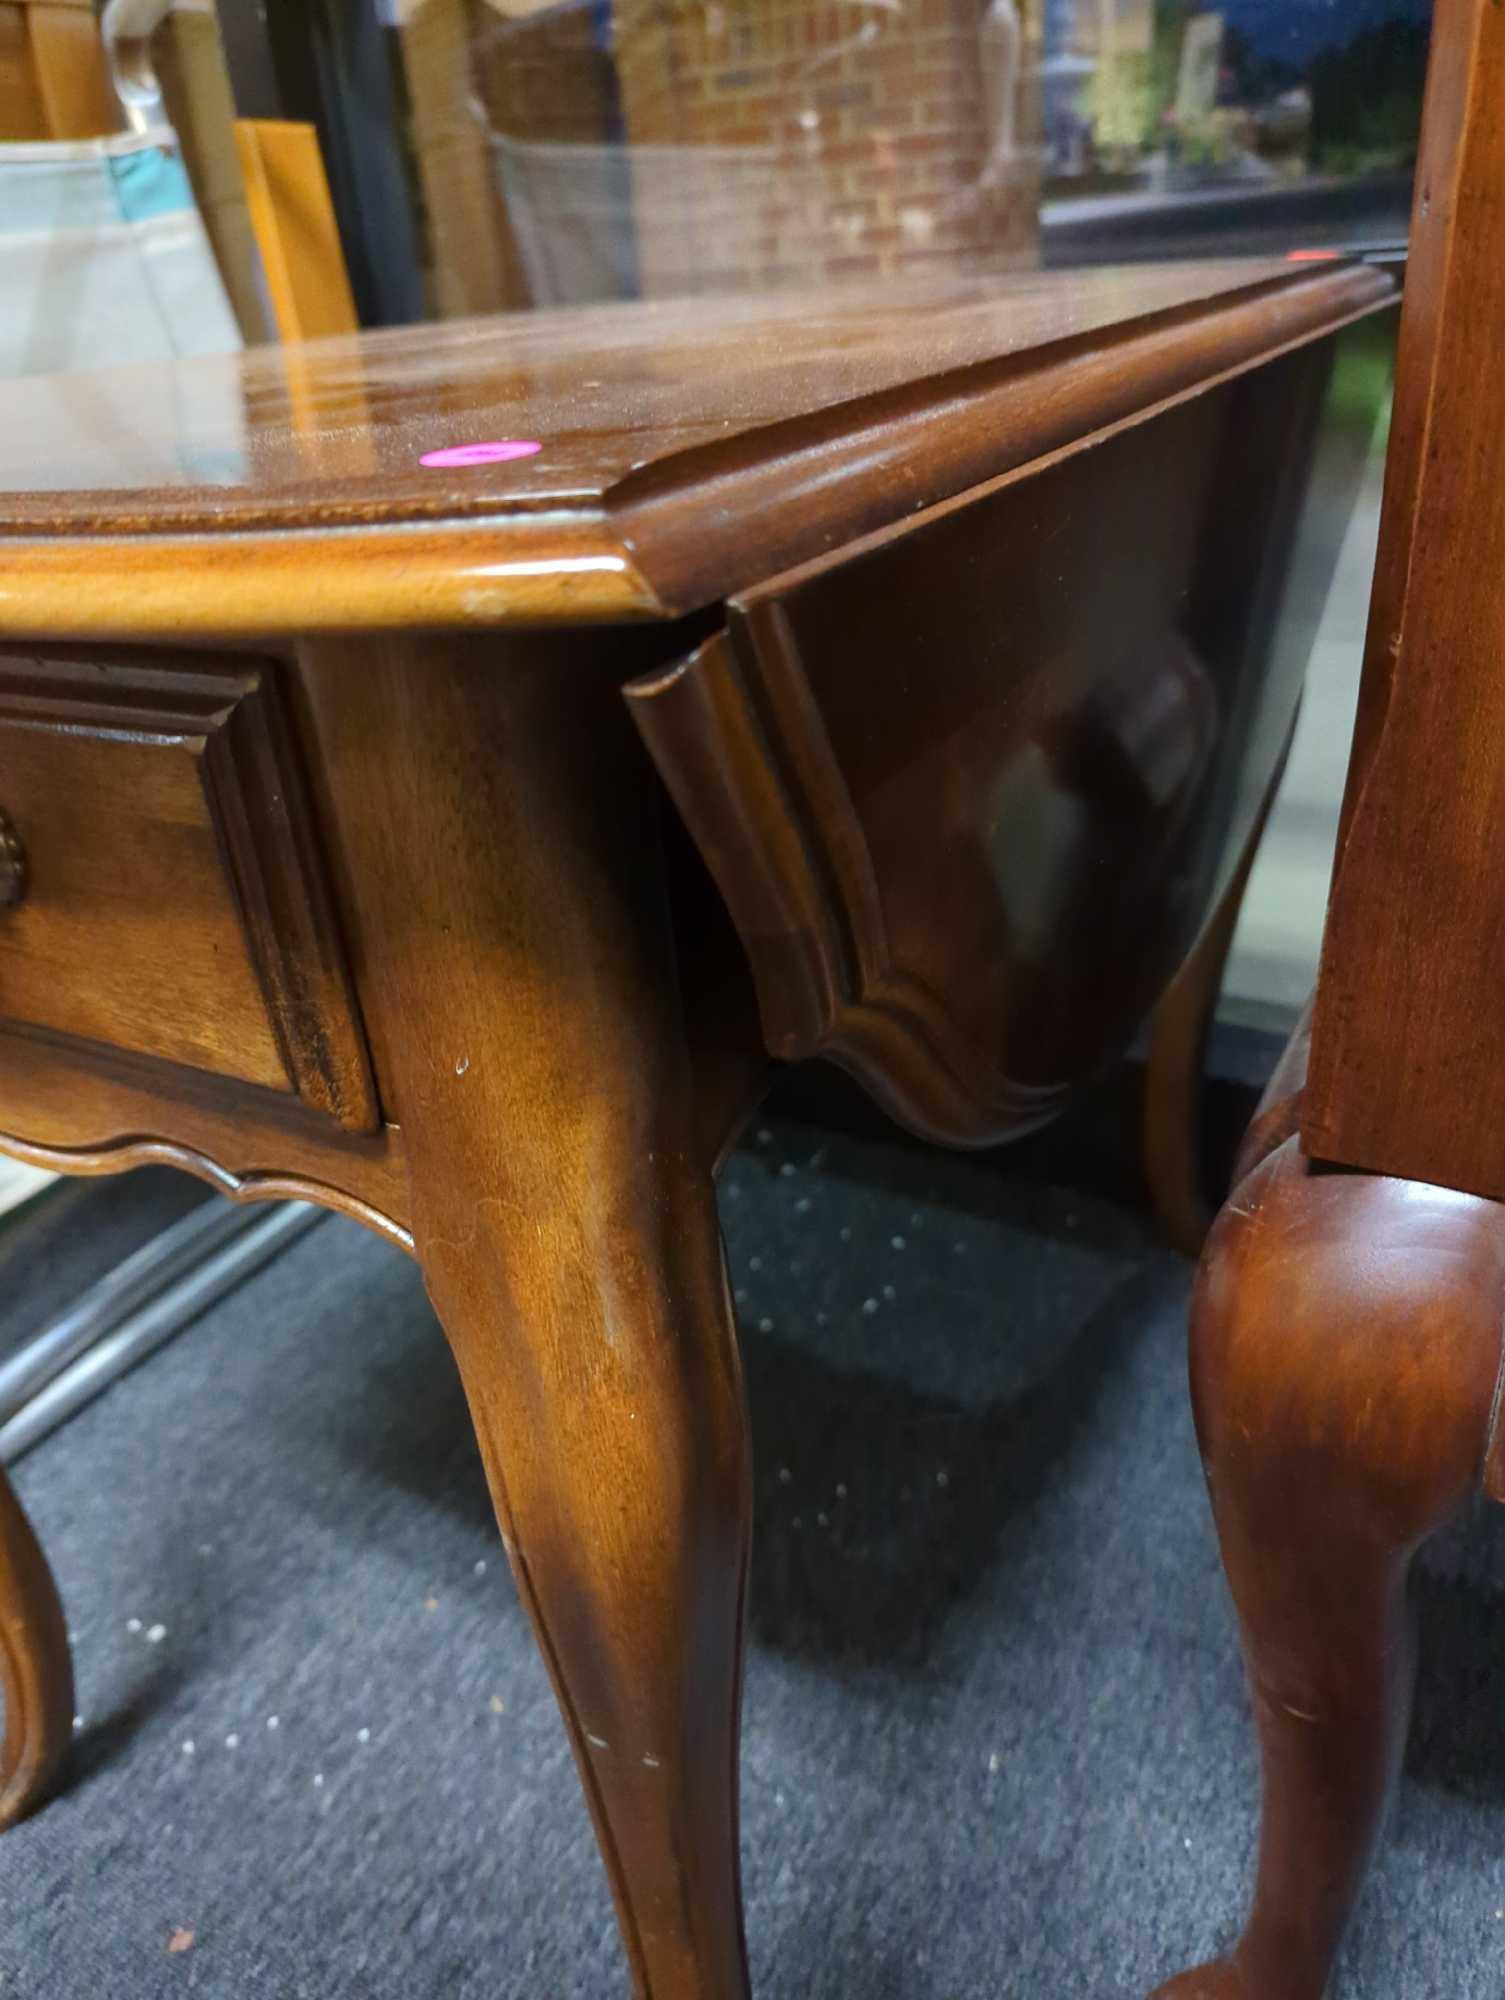 Traditional Ethan Allen Wood Drop Leaf End Table. Comes as is shown in photos. Appears to be used.